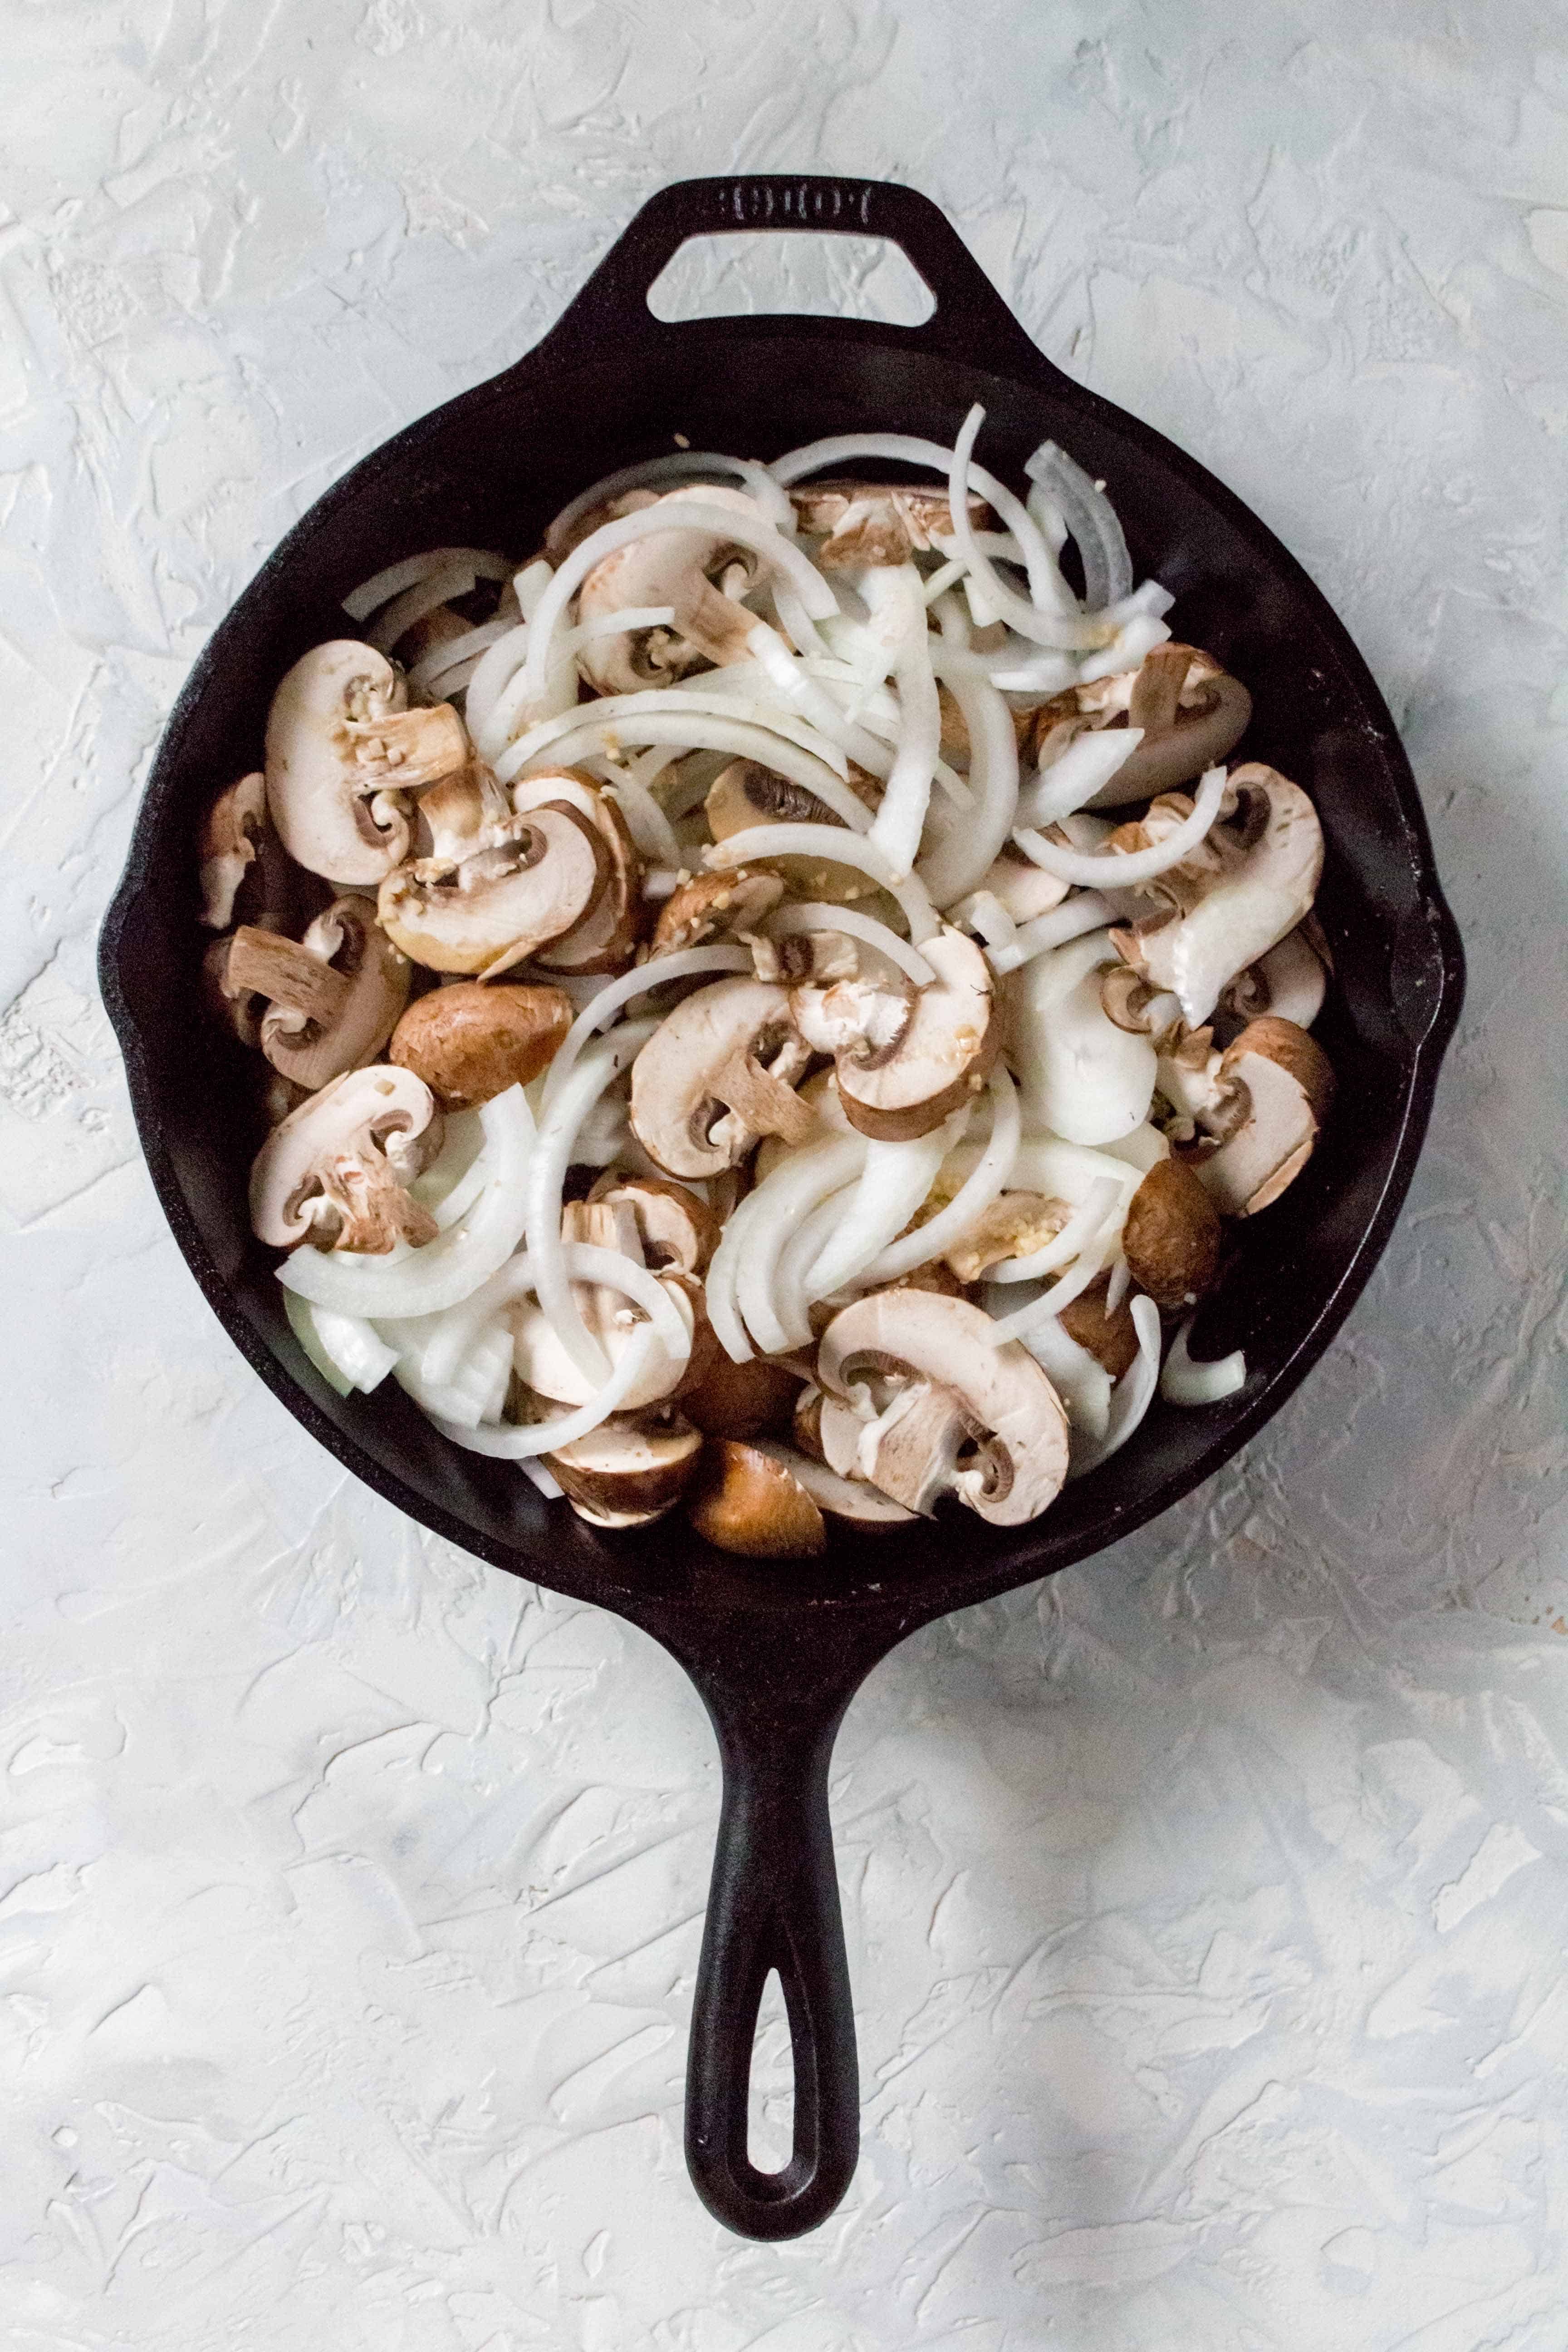 one pot chicken thighs and rice: Back in the cast iron, sauté the mushrooms, onions, and garlic, using the liquid from the olive oil and chicken, for 5 minutes.